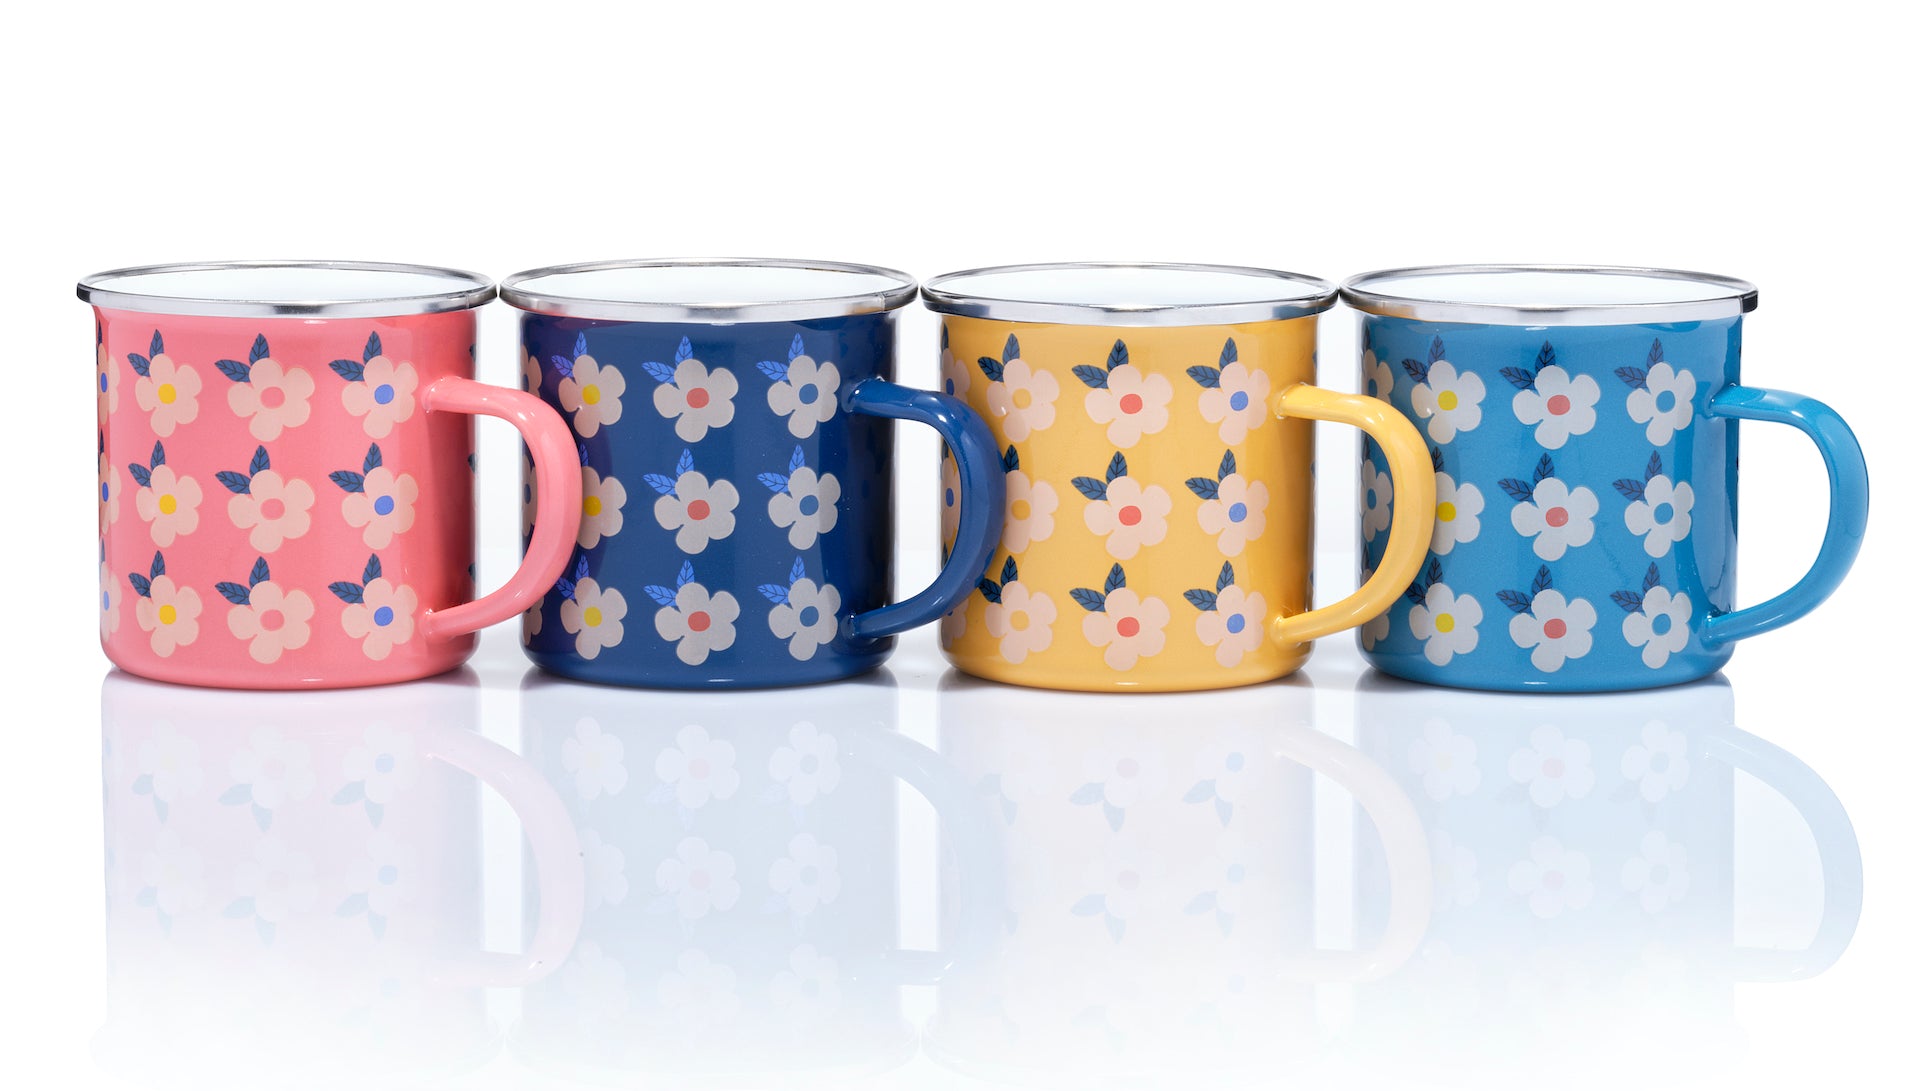 A Set of Four Beautiful Enamel Mugs in our Stunning Retro Vintage Floral - Honey Yellow Rose Pink Ocean Blue Midnight Blue  Edit alt text